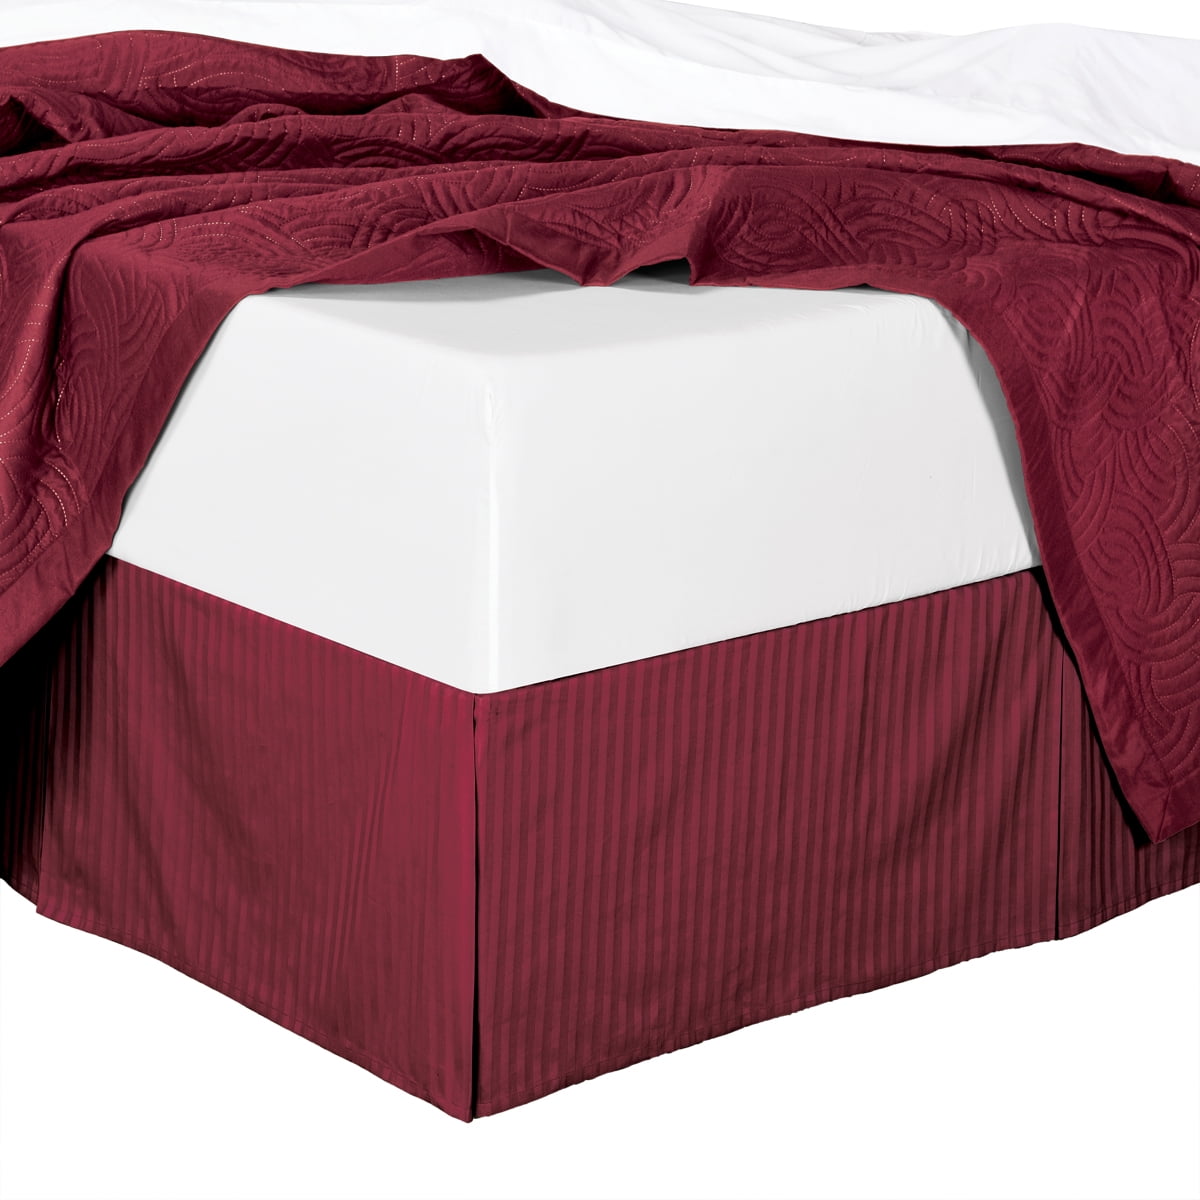 Details about   WESTPOINT HOME QUEEN Burgundy Black Pattern Tailored Bed Skirt NEW FREE SHIPPING 